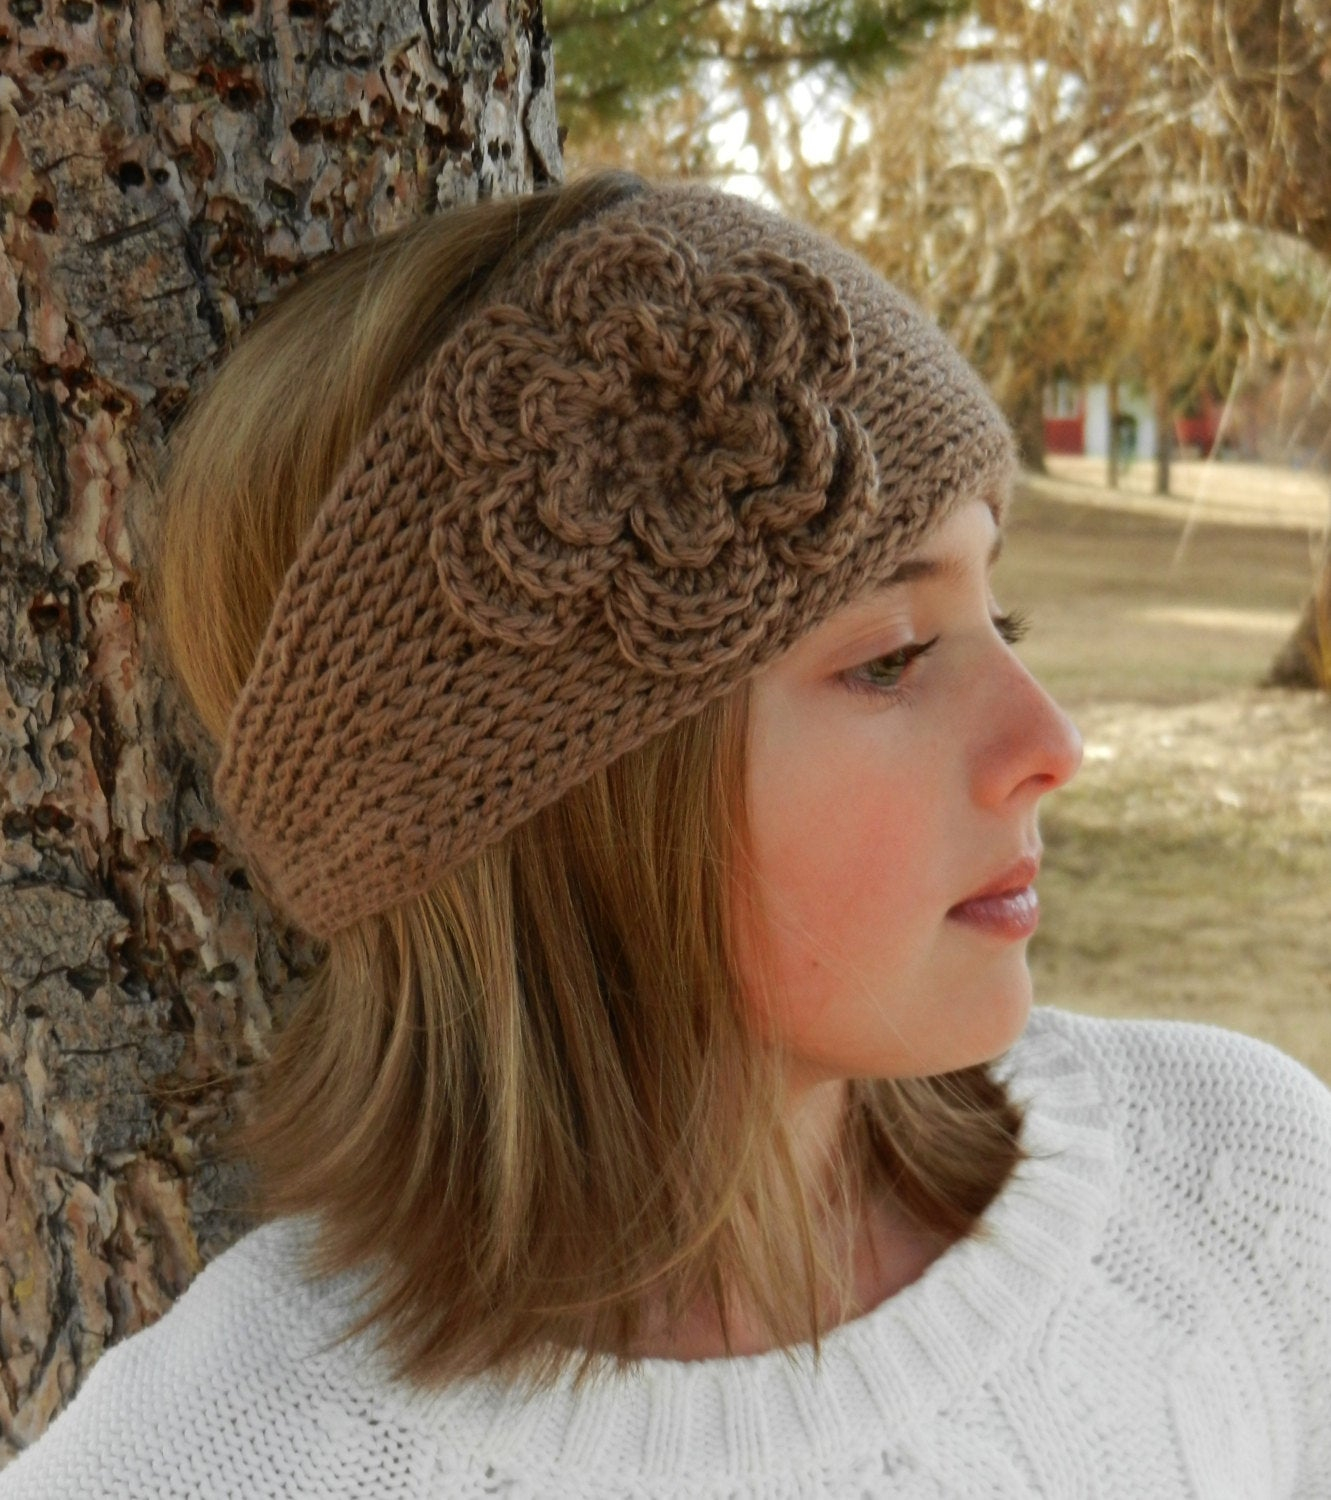 Knitted Headband Patterns With Flower Tunisian Knit Look Crochet Headband Pattern With Flower Tunisian Crochet Headband Earwarmer Pattern With Flower Instant Download